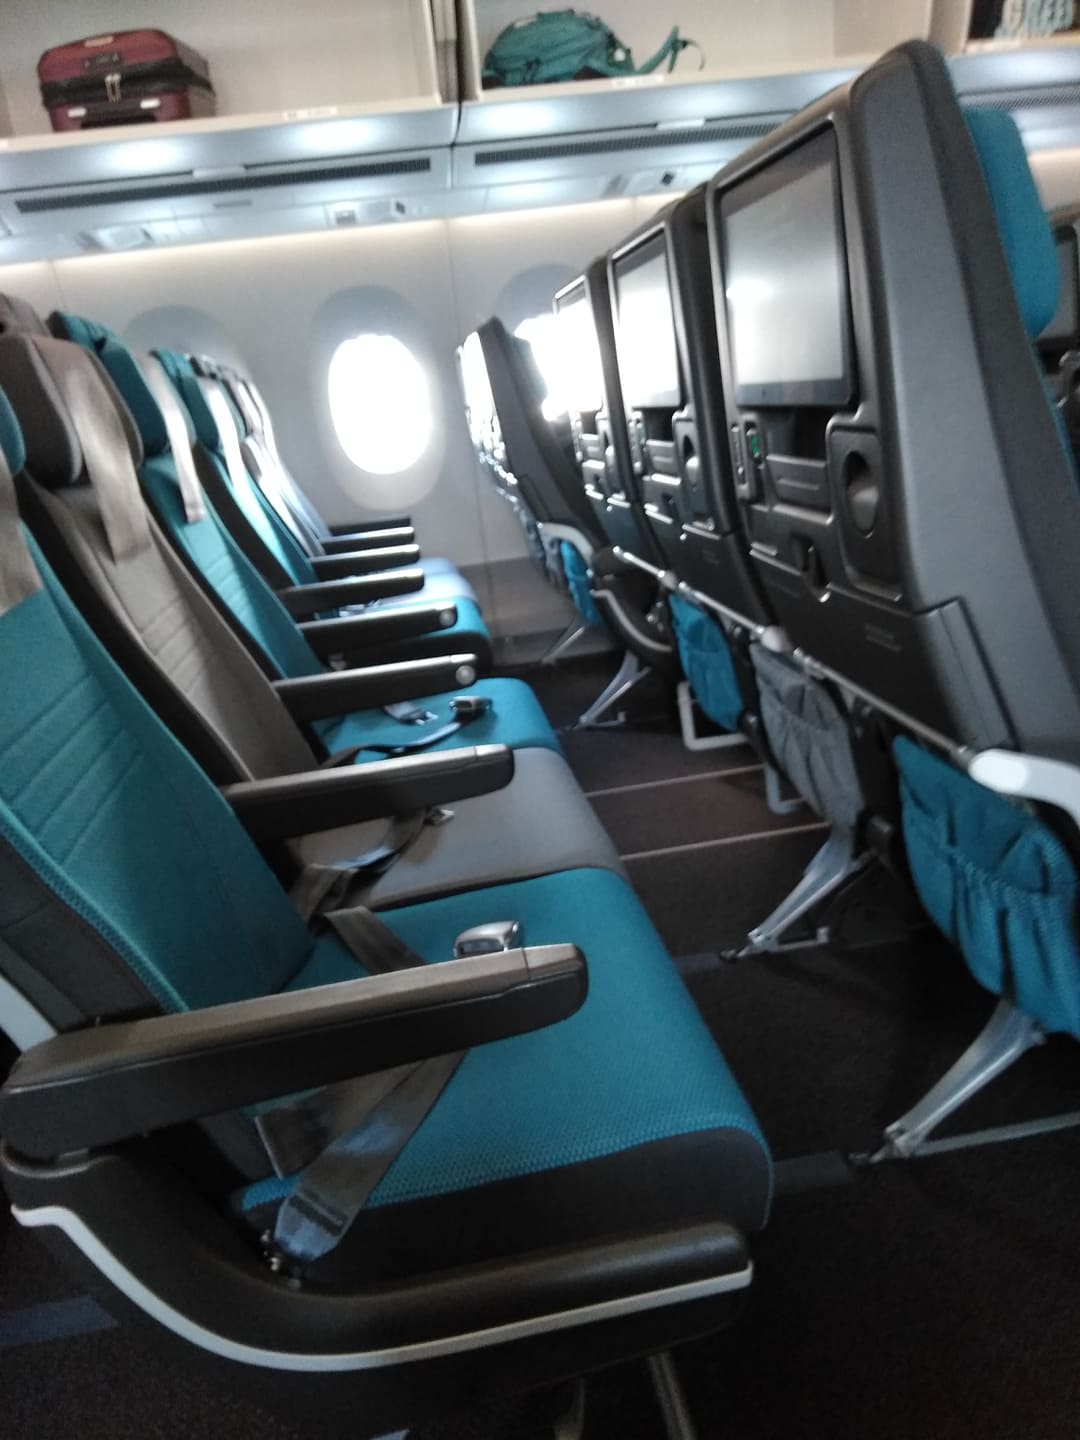 empty row of blue seats on a plane